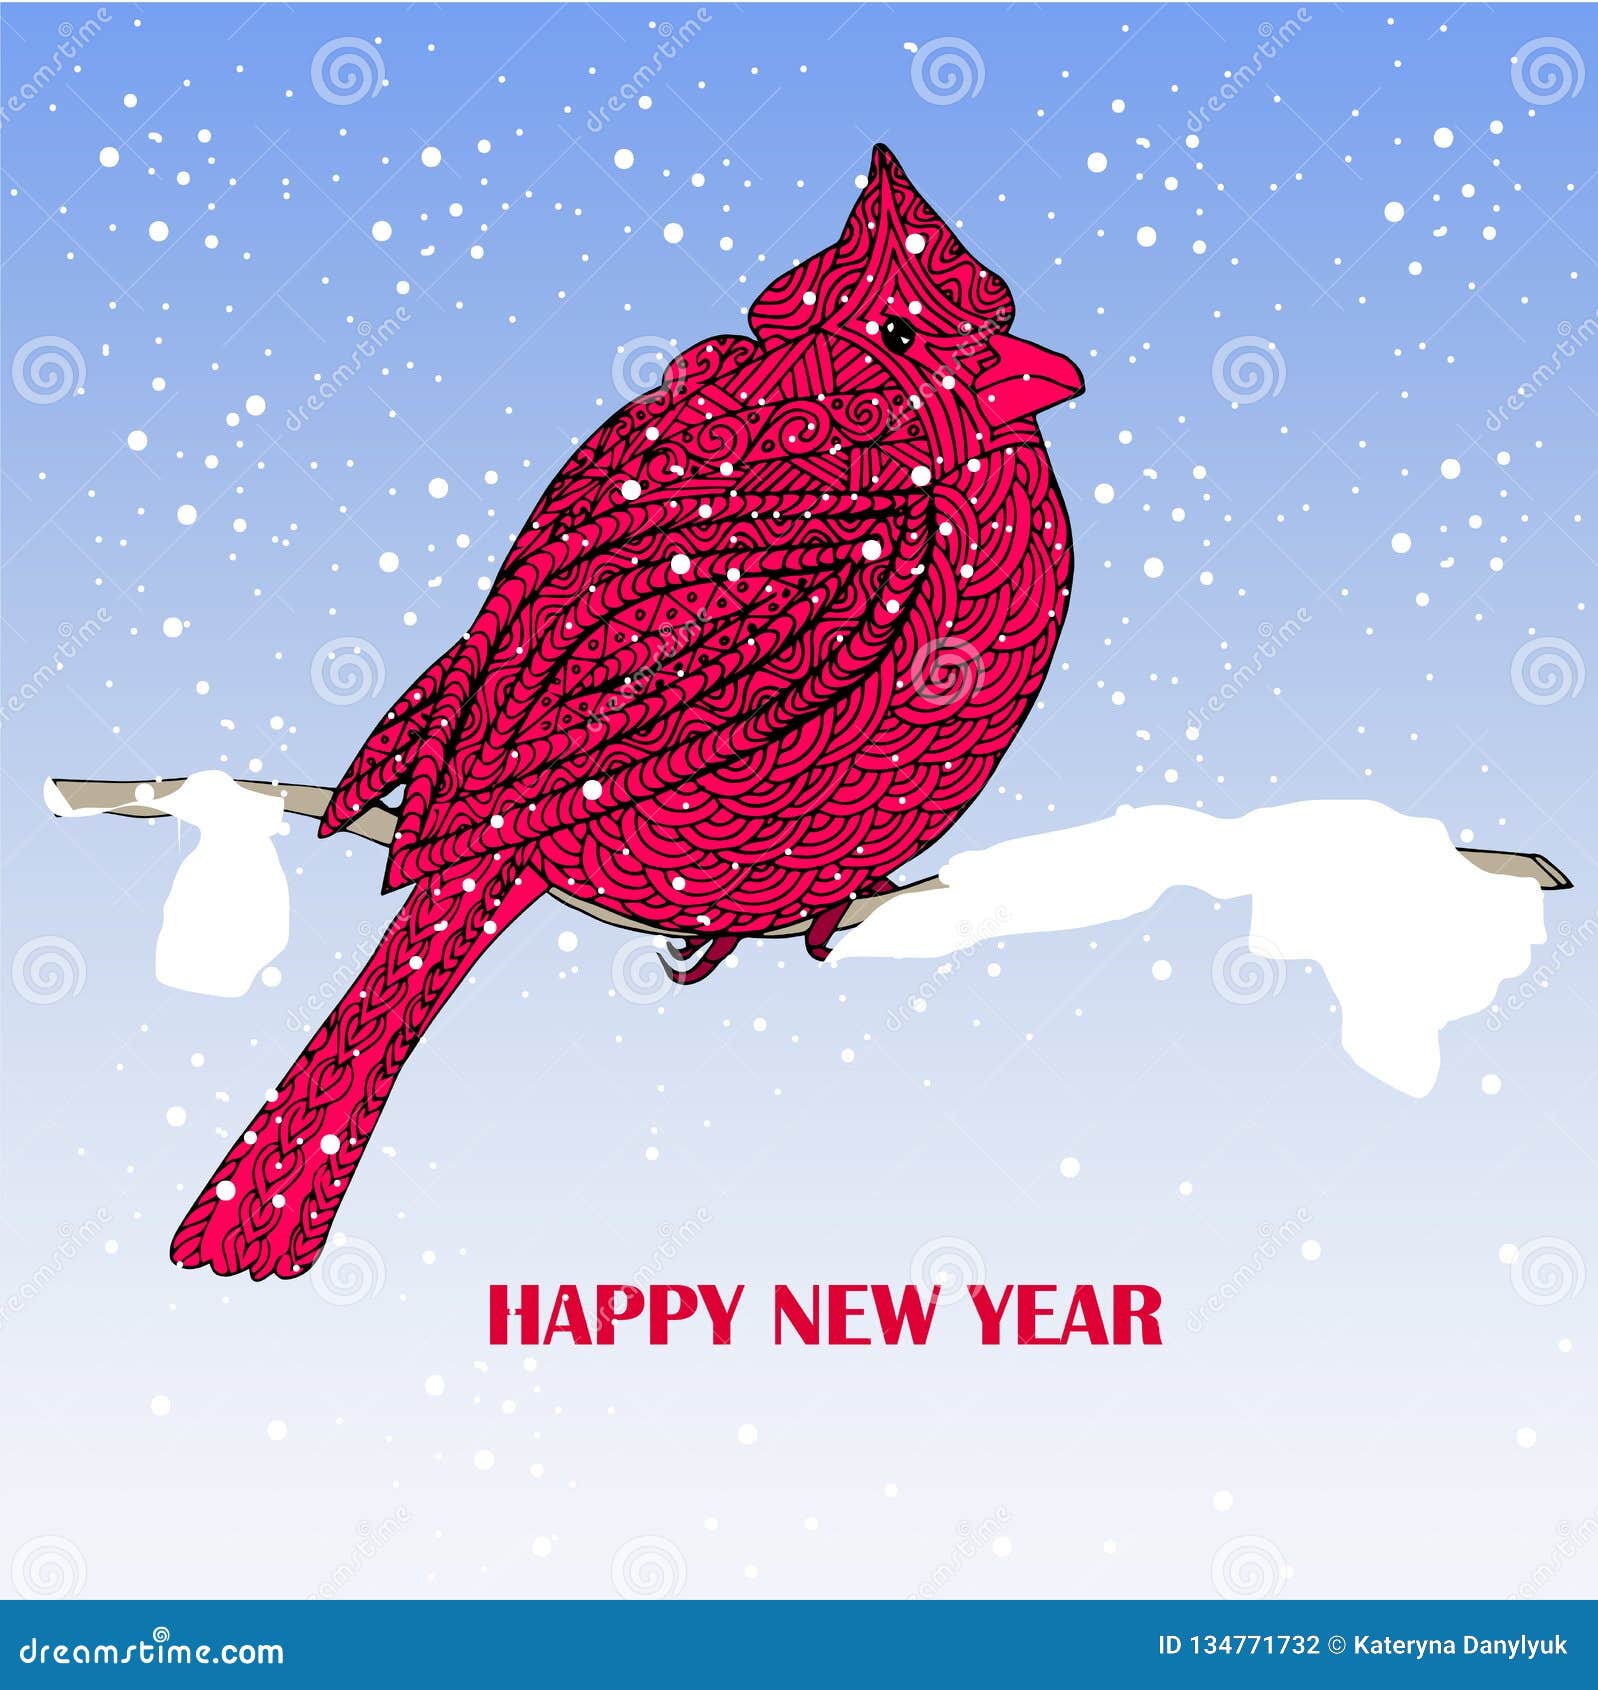 Happy New Year Typography Banner With Cardinal Hand Drawn Red